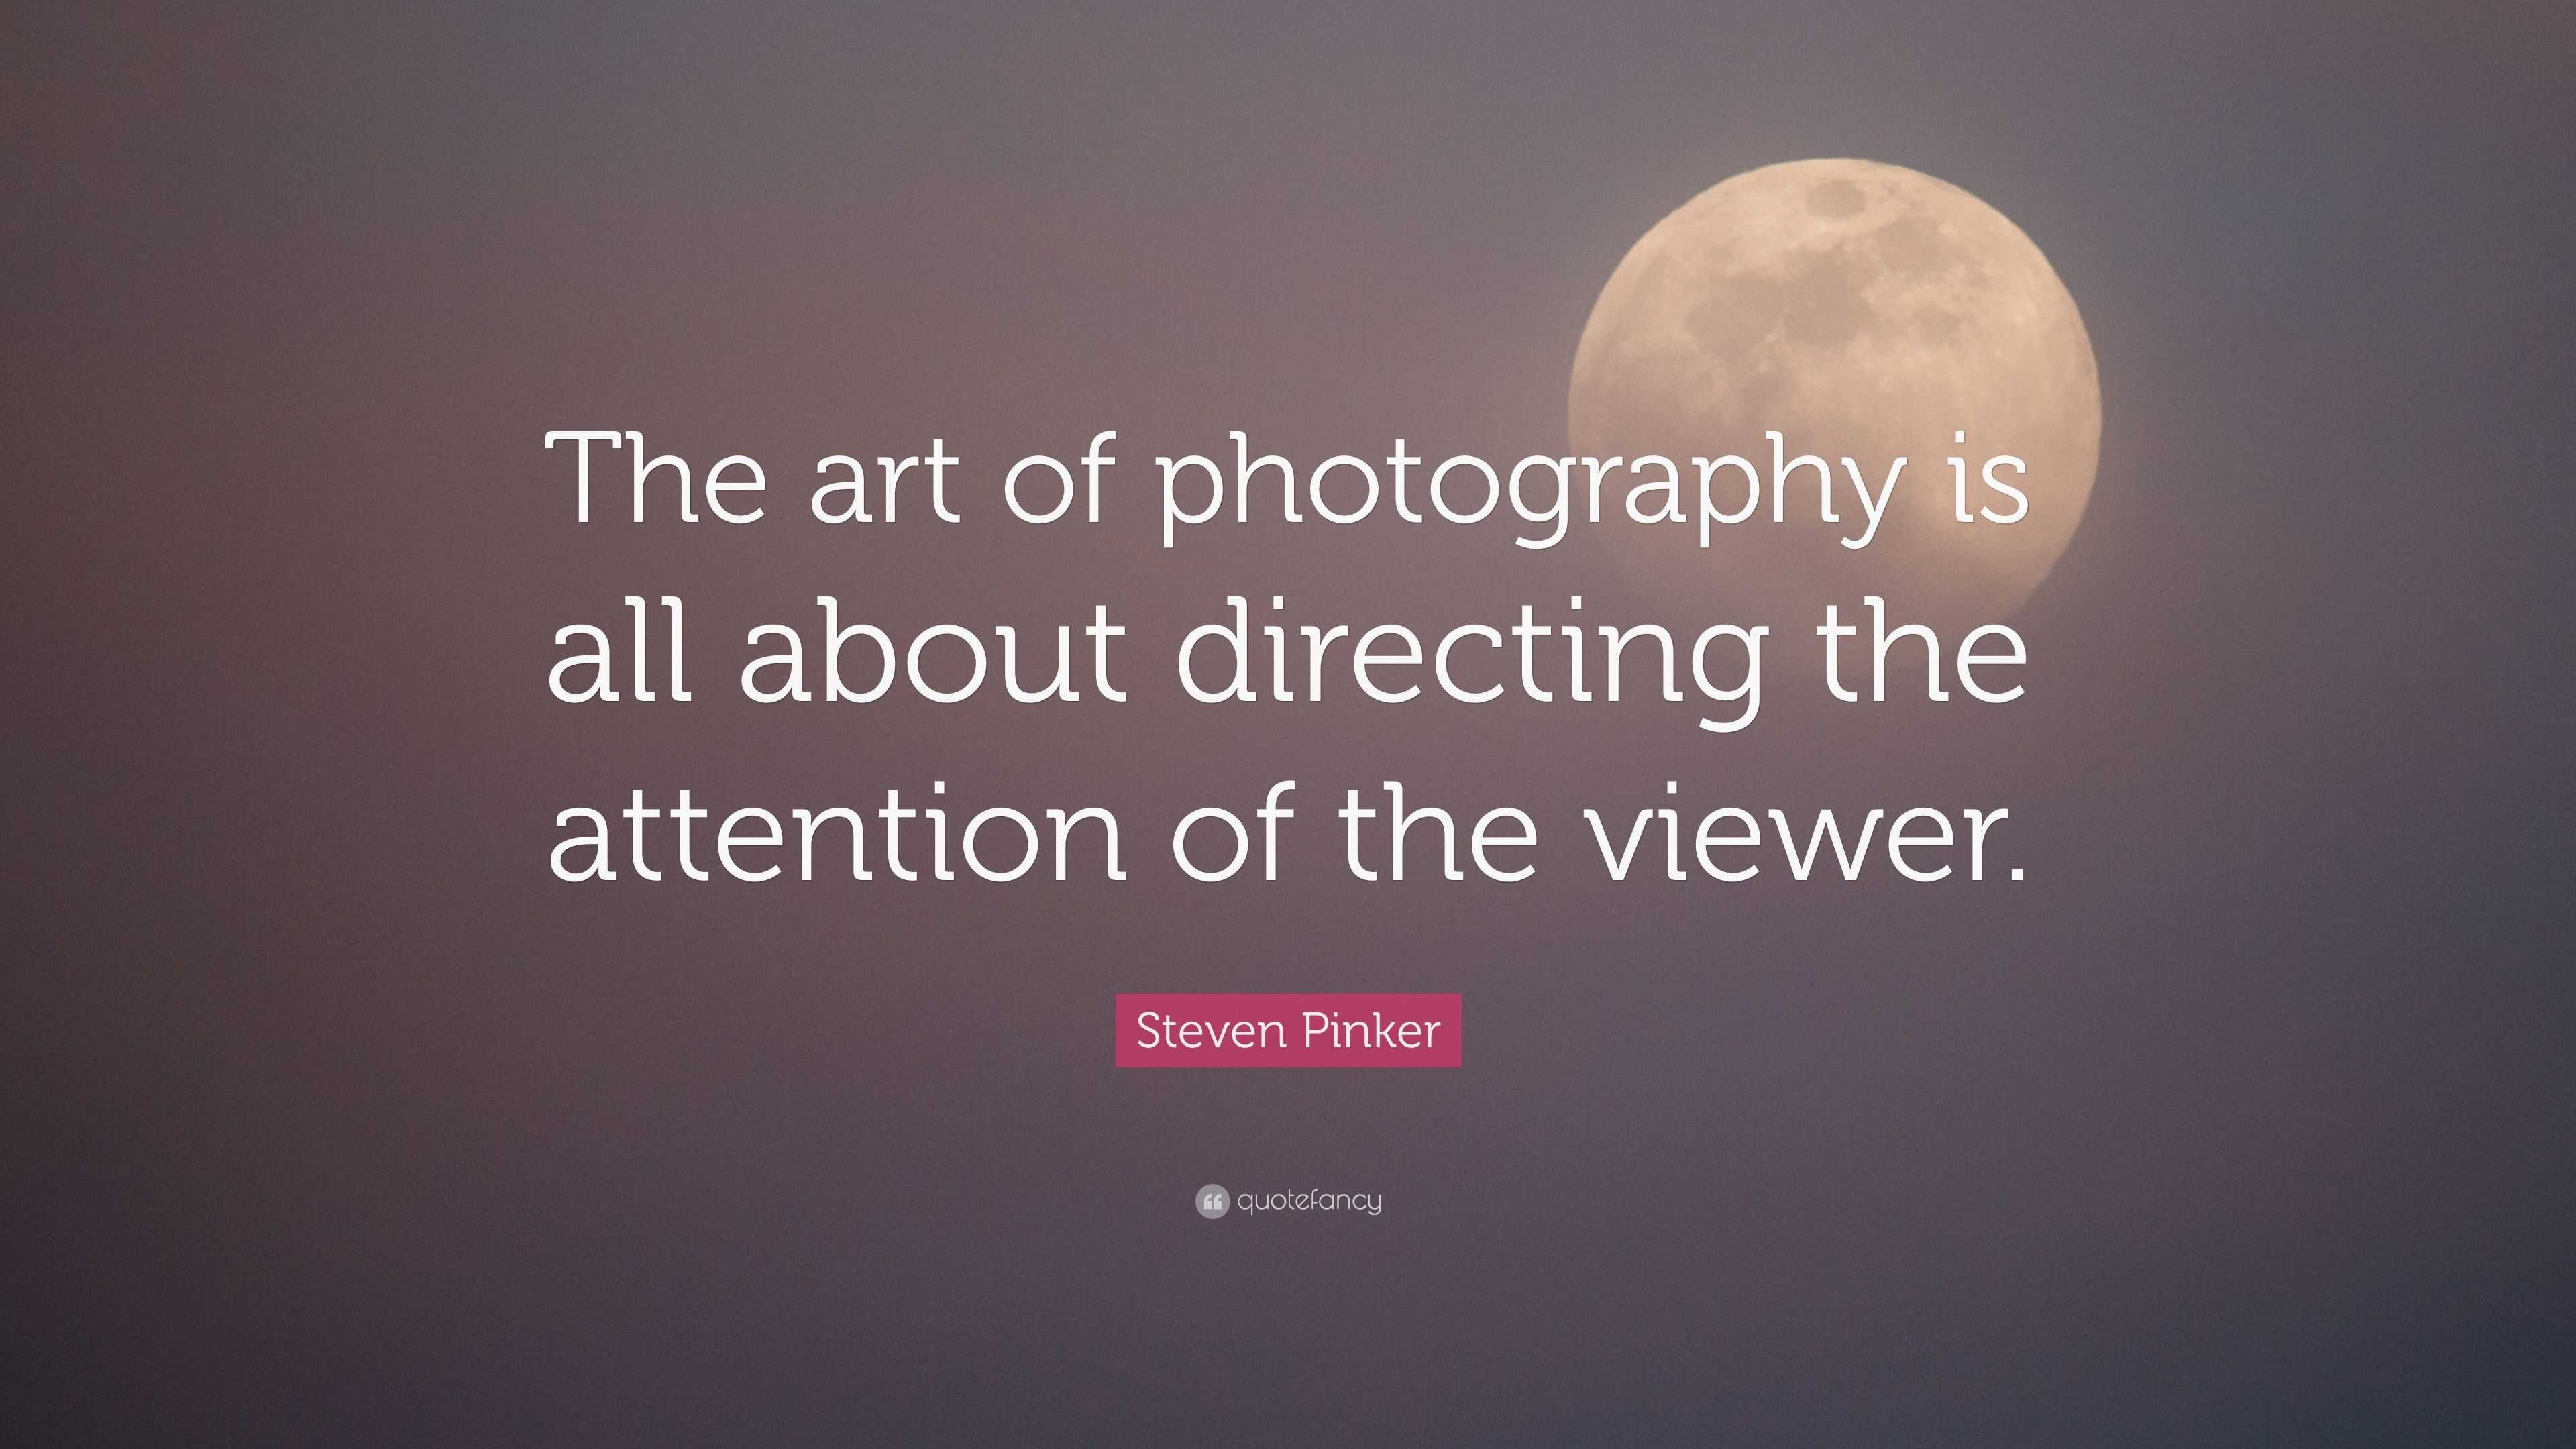 Steven Pinker Quote: “The art of photography is all about directing the ...